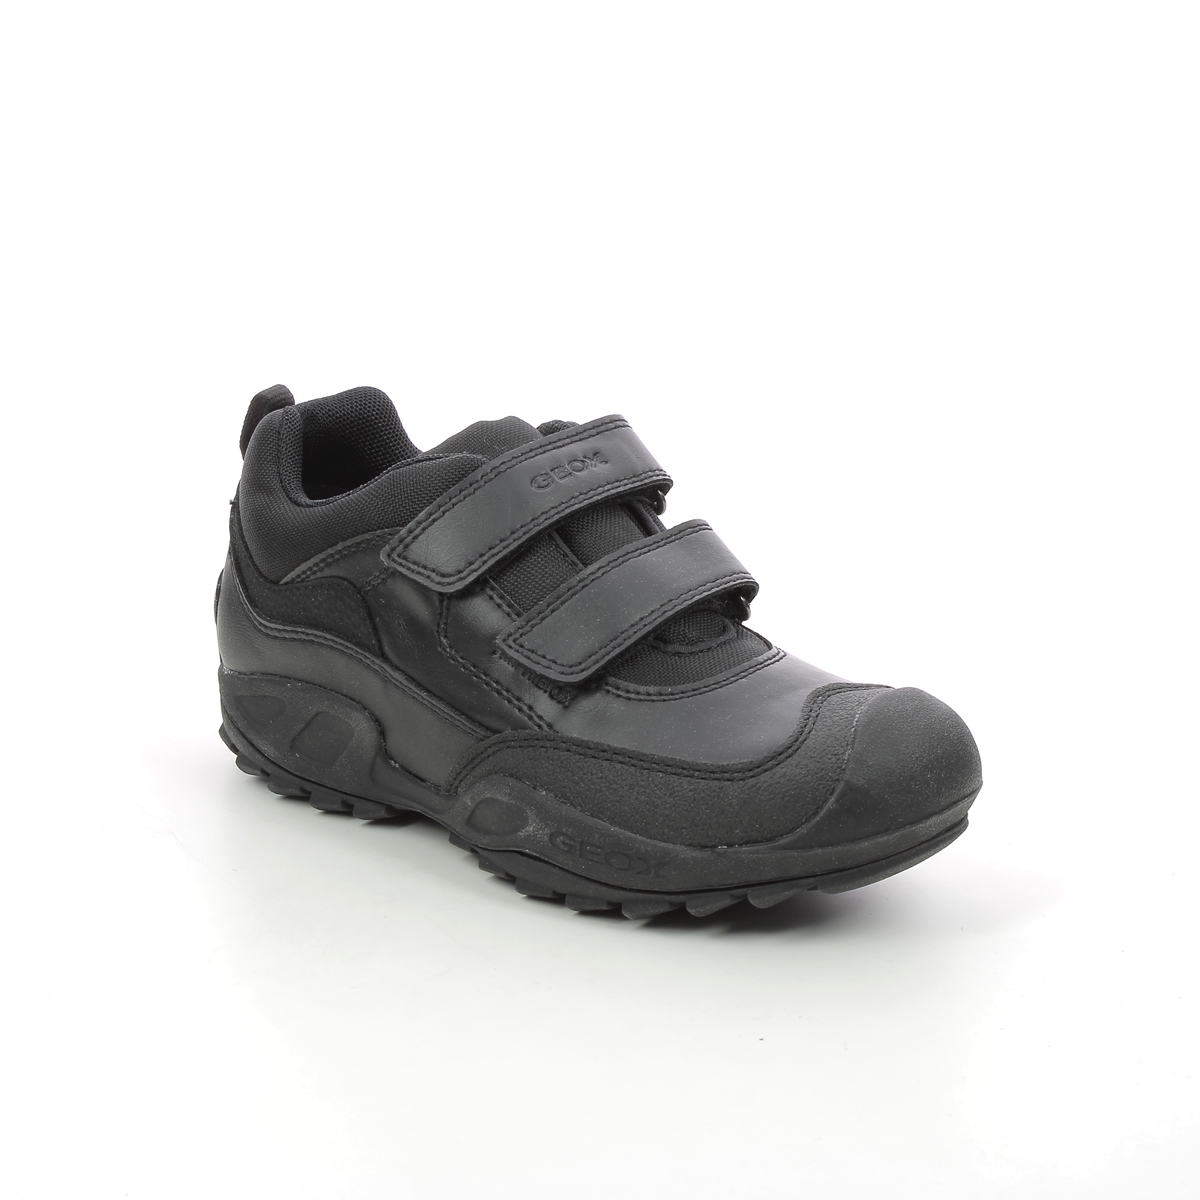 Geox - New Savage Tex (Black) J841Wb-C9999 In Size 38 In Plain Black For School For kids